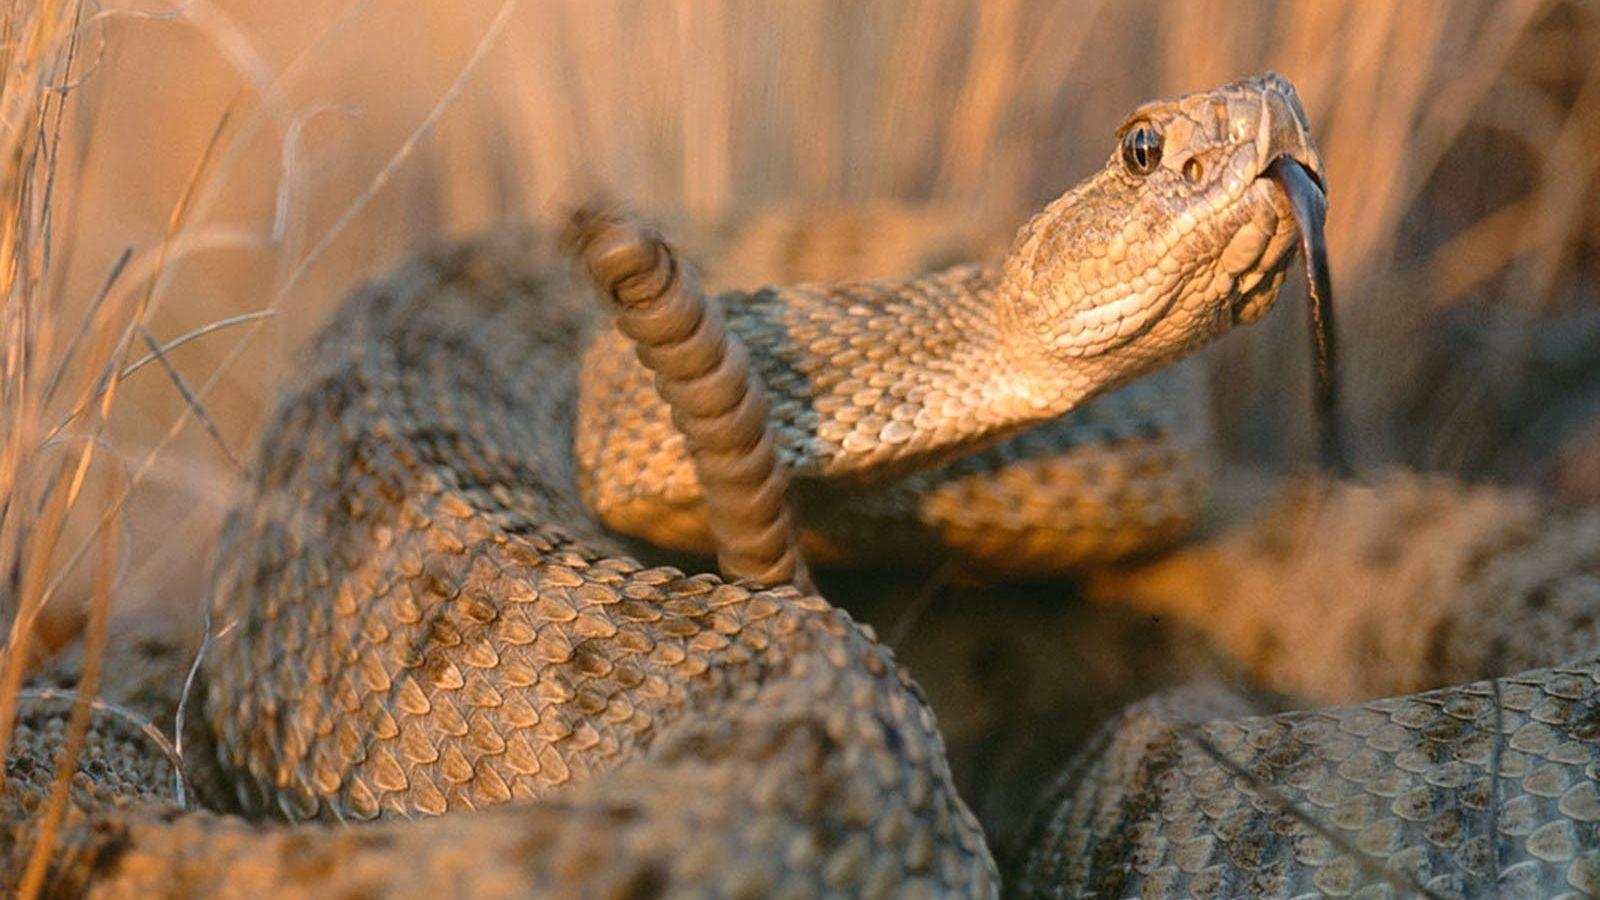 Rattlesnakes trick humans into thinking theyre closer than they are   National Geographic